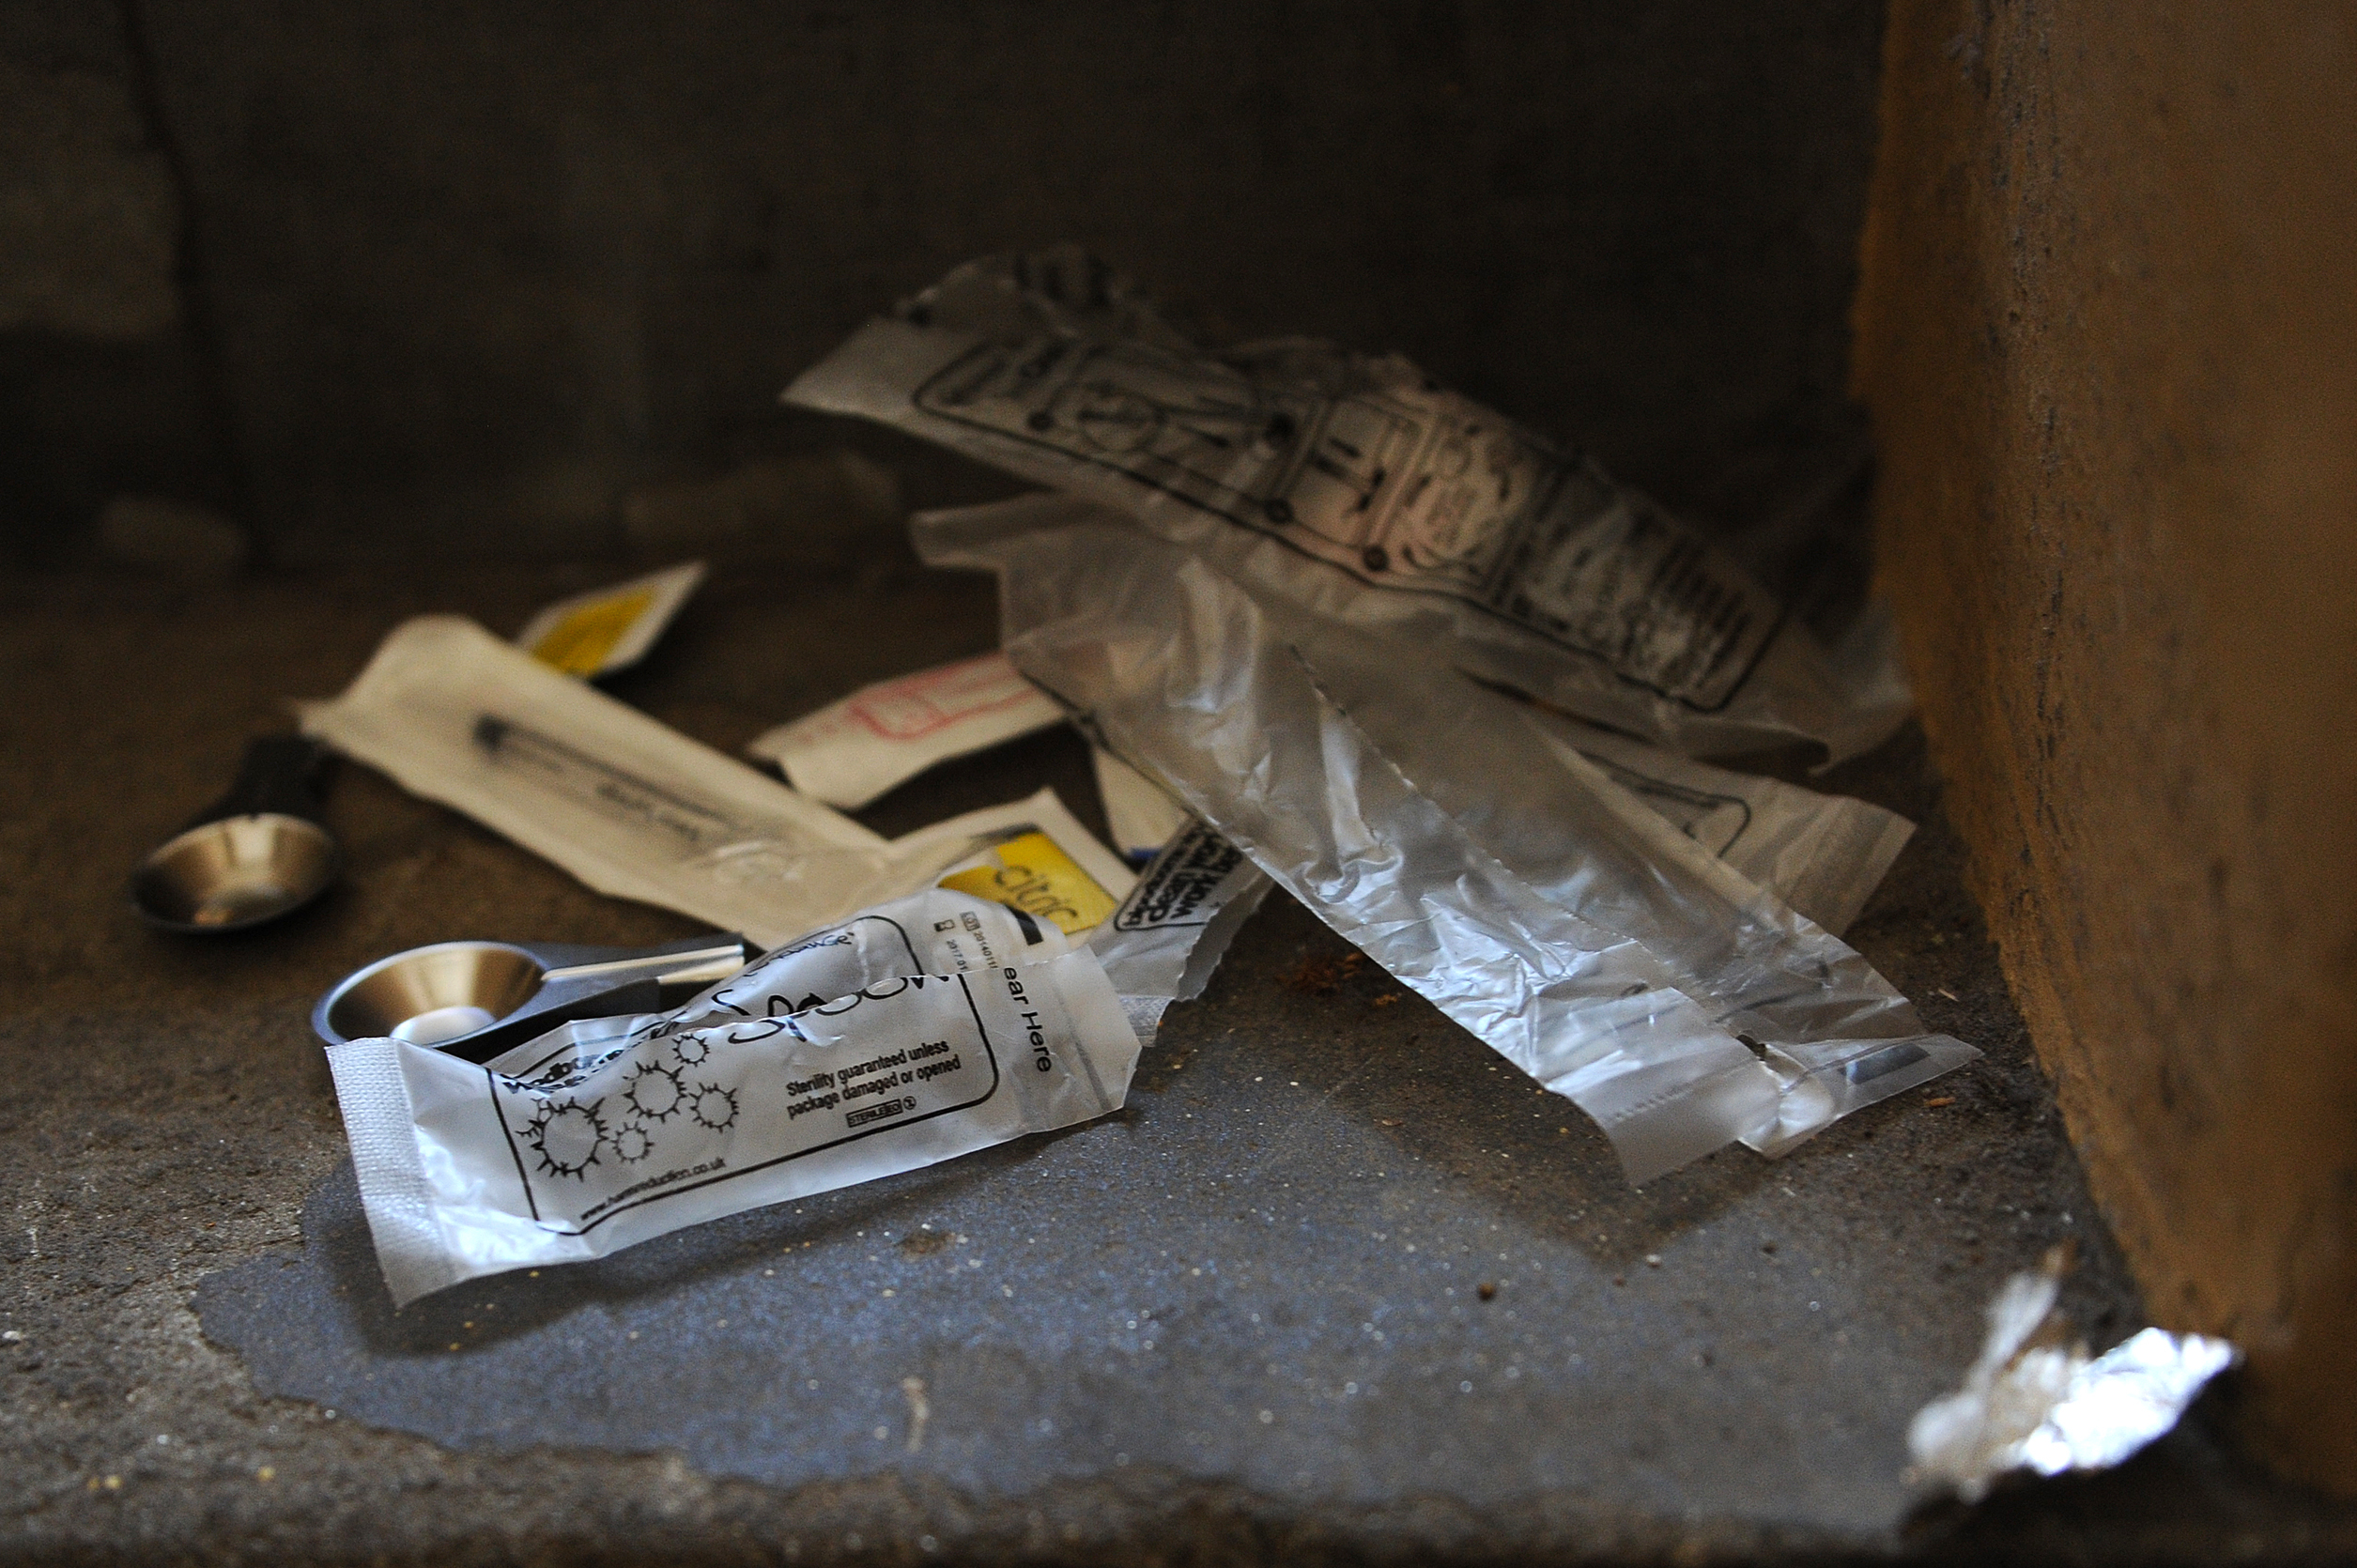 Drug equipment abandoned by a heroin addict in a Dundee stairwell.